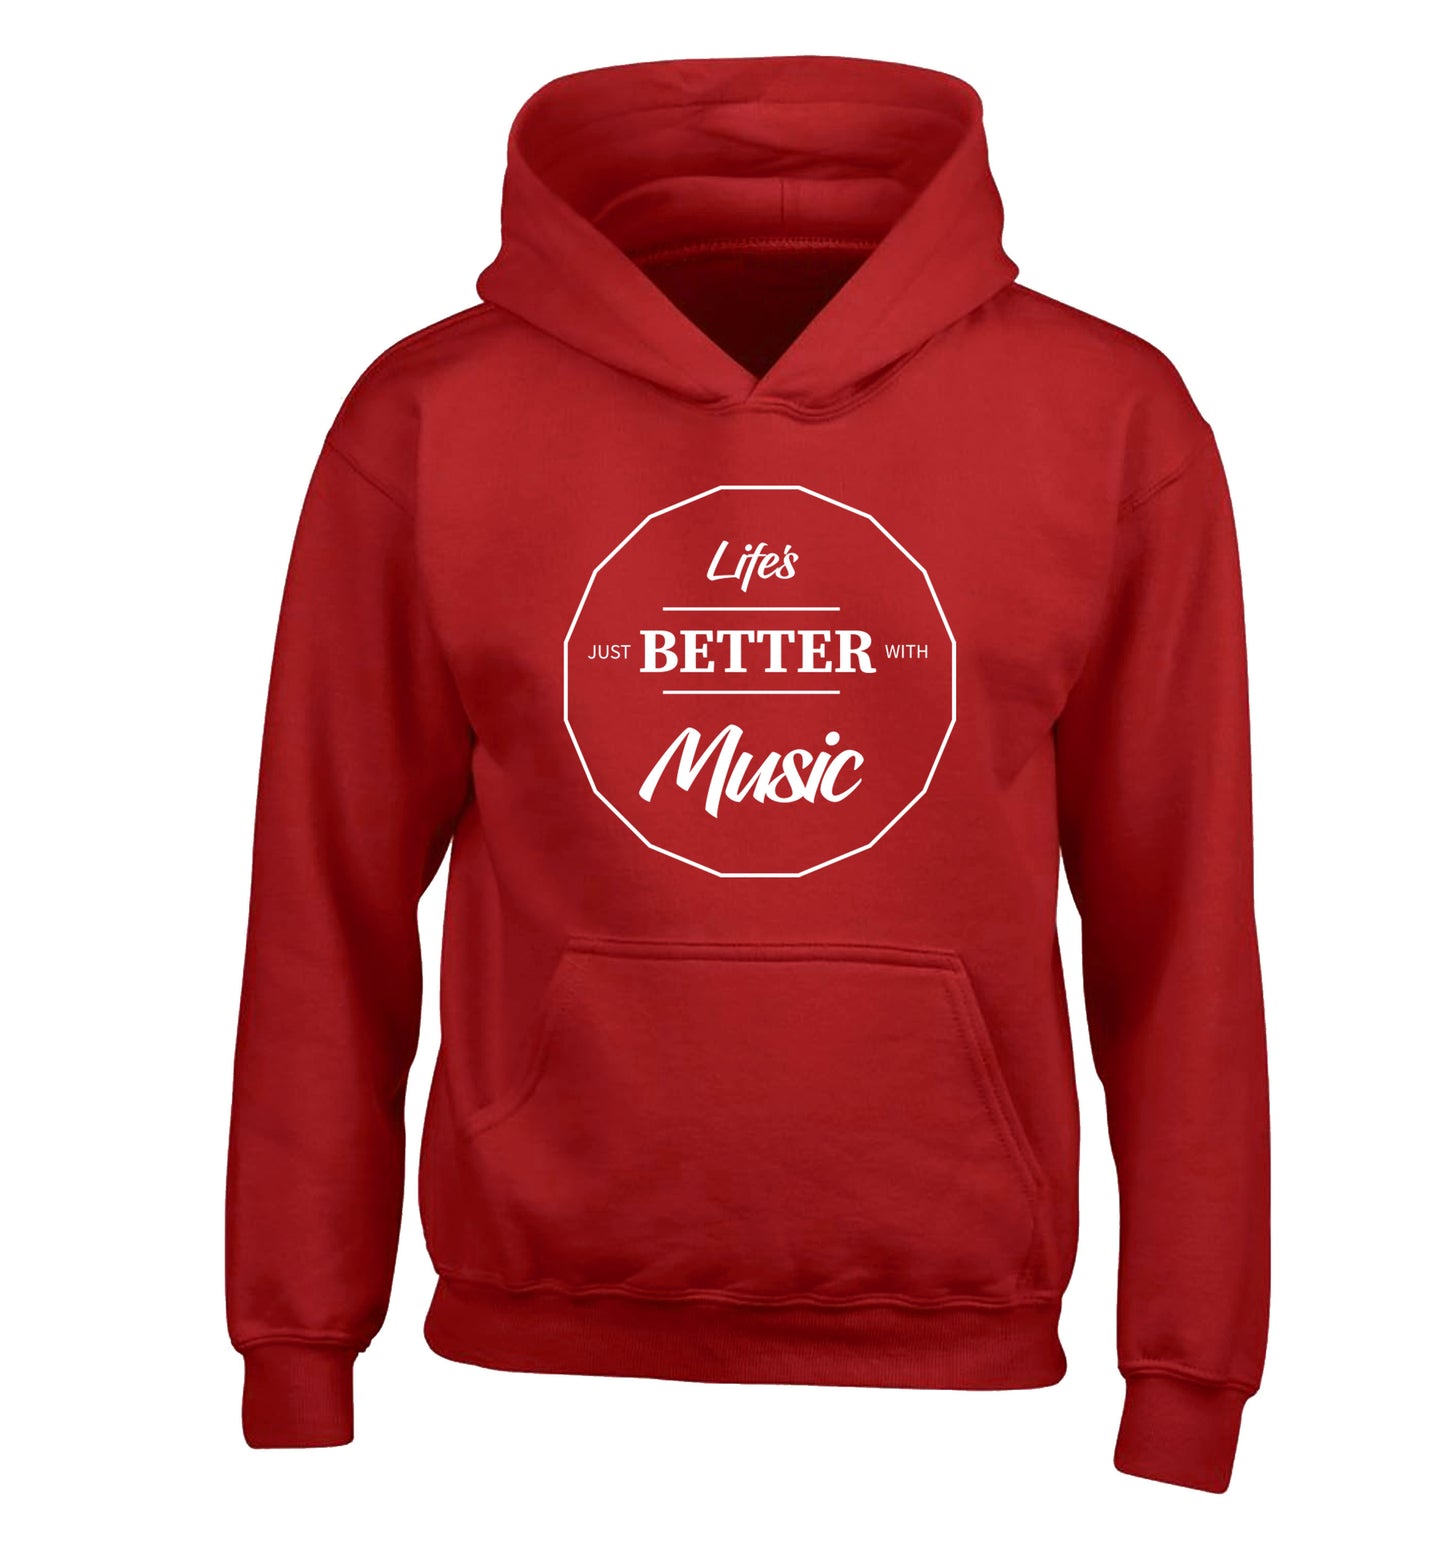 Life is Better With Music children's red hoodie 12-13 Years